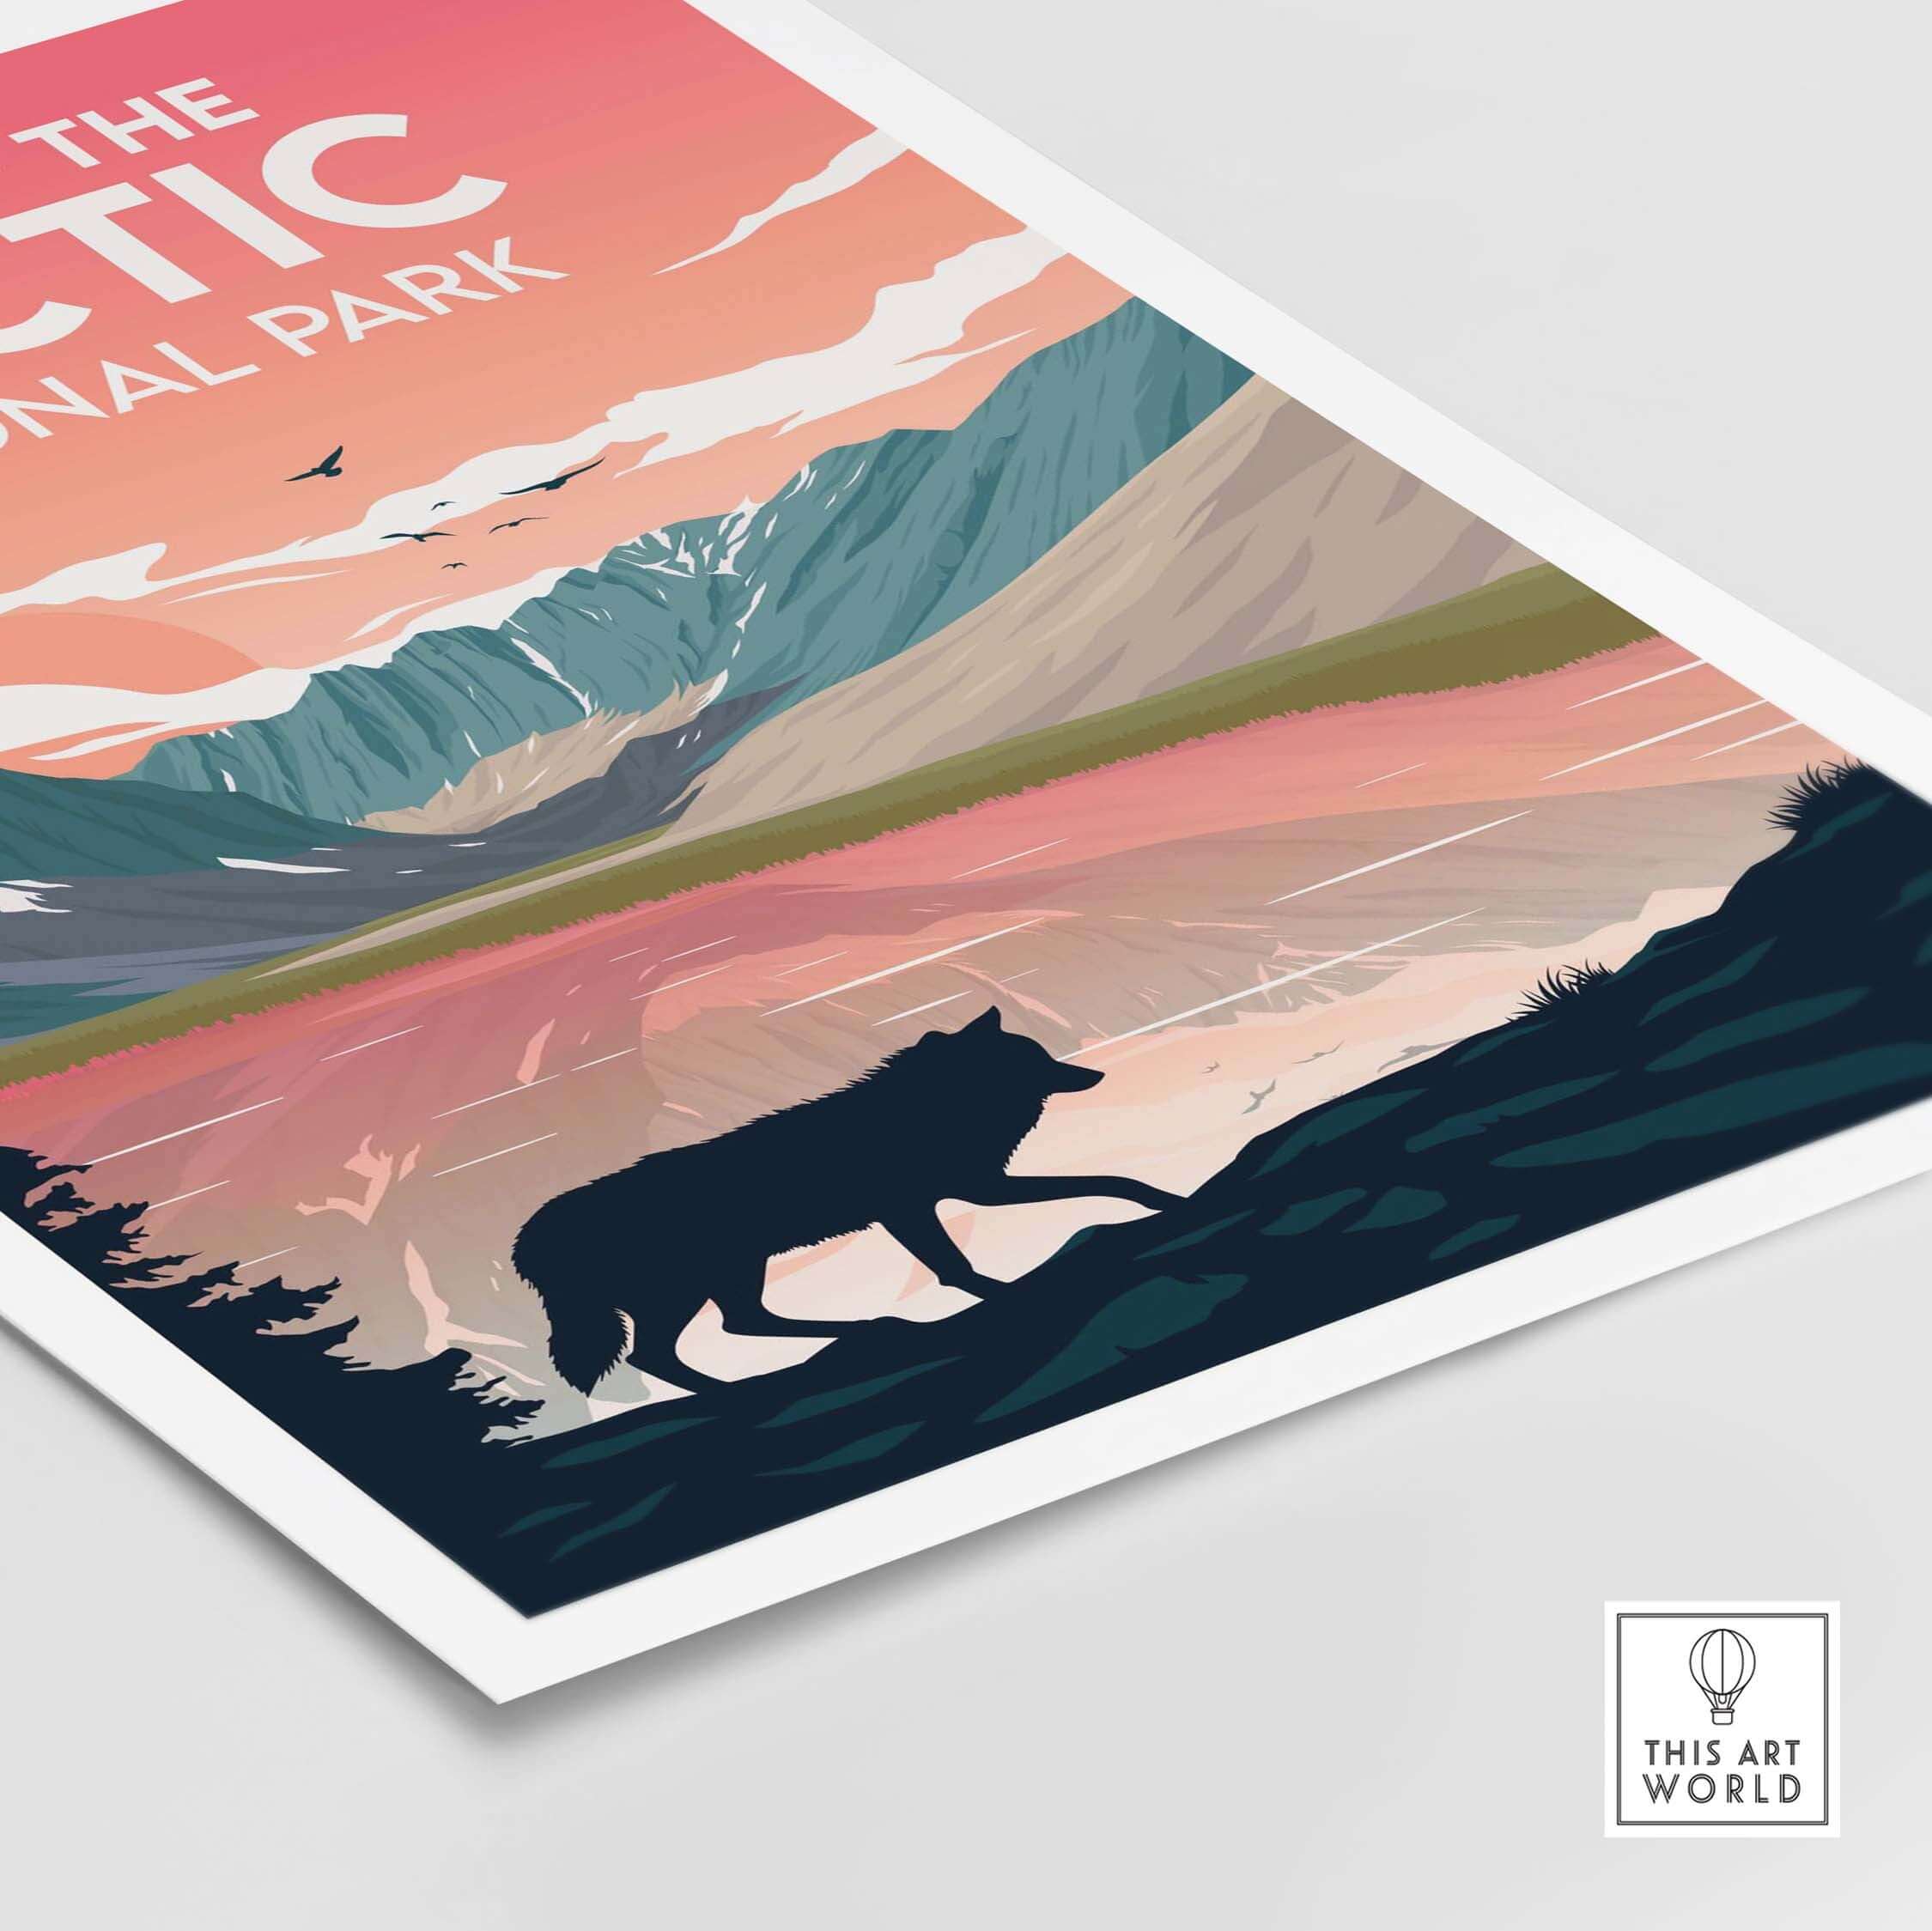 gates of the arctic poster